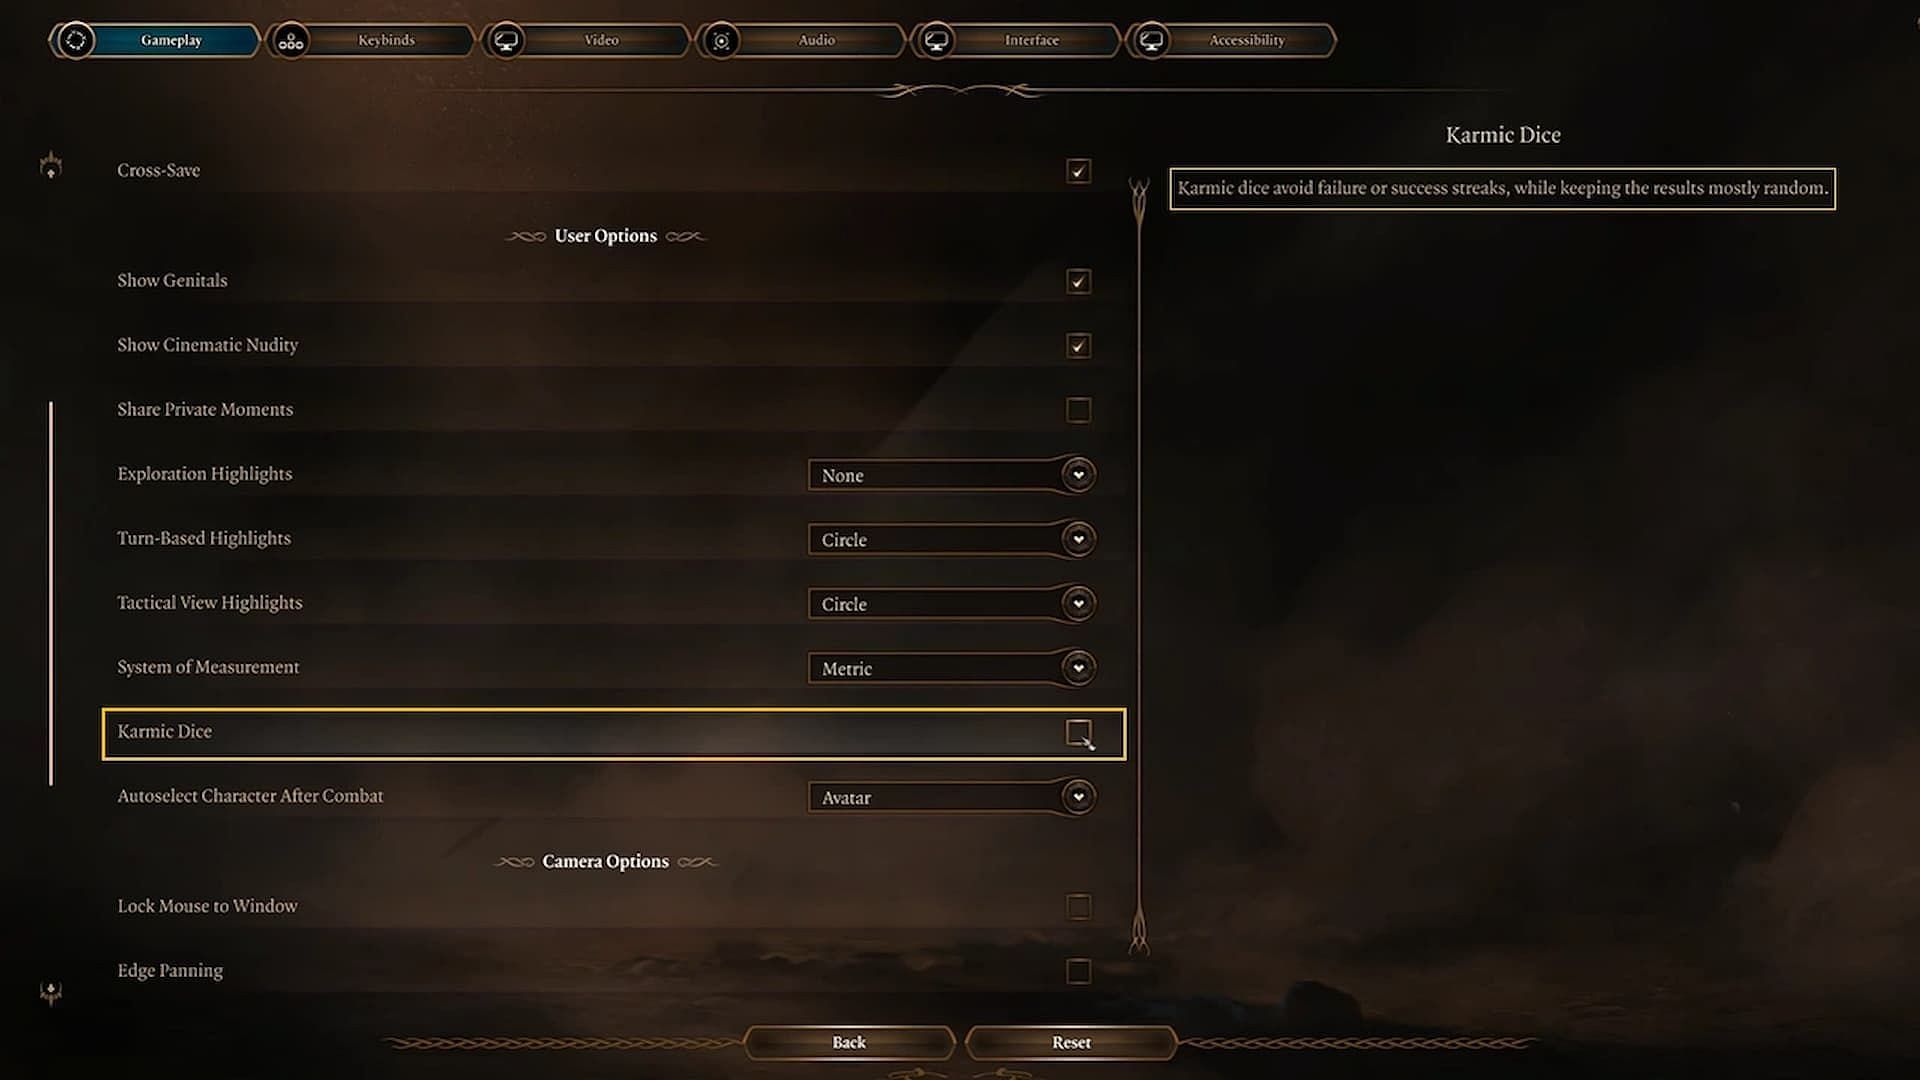 Players can choose whether to have Karmic Dice turned on or off (Image via Larian Studios)